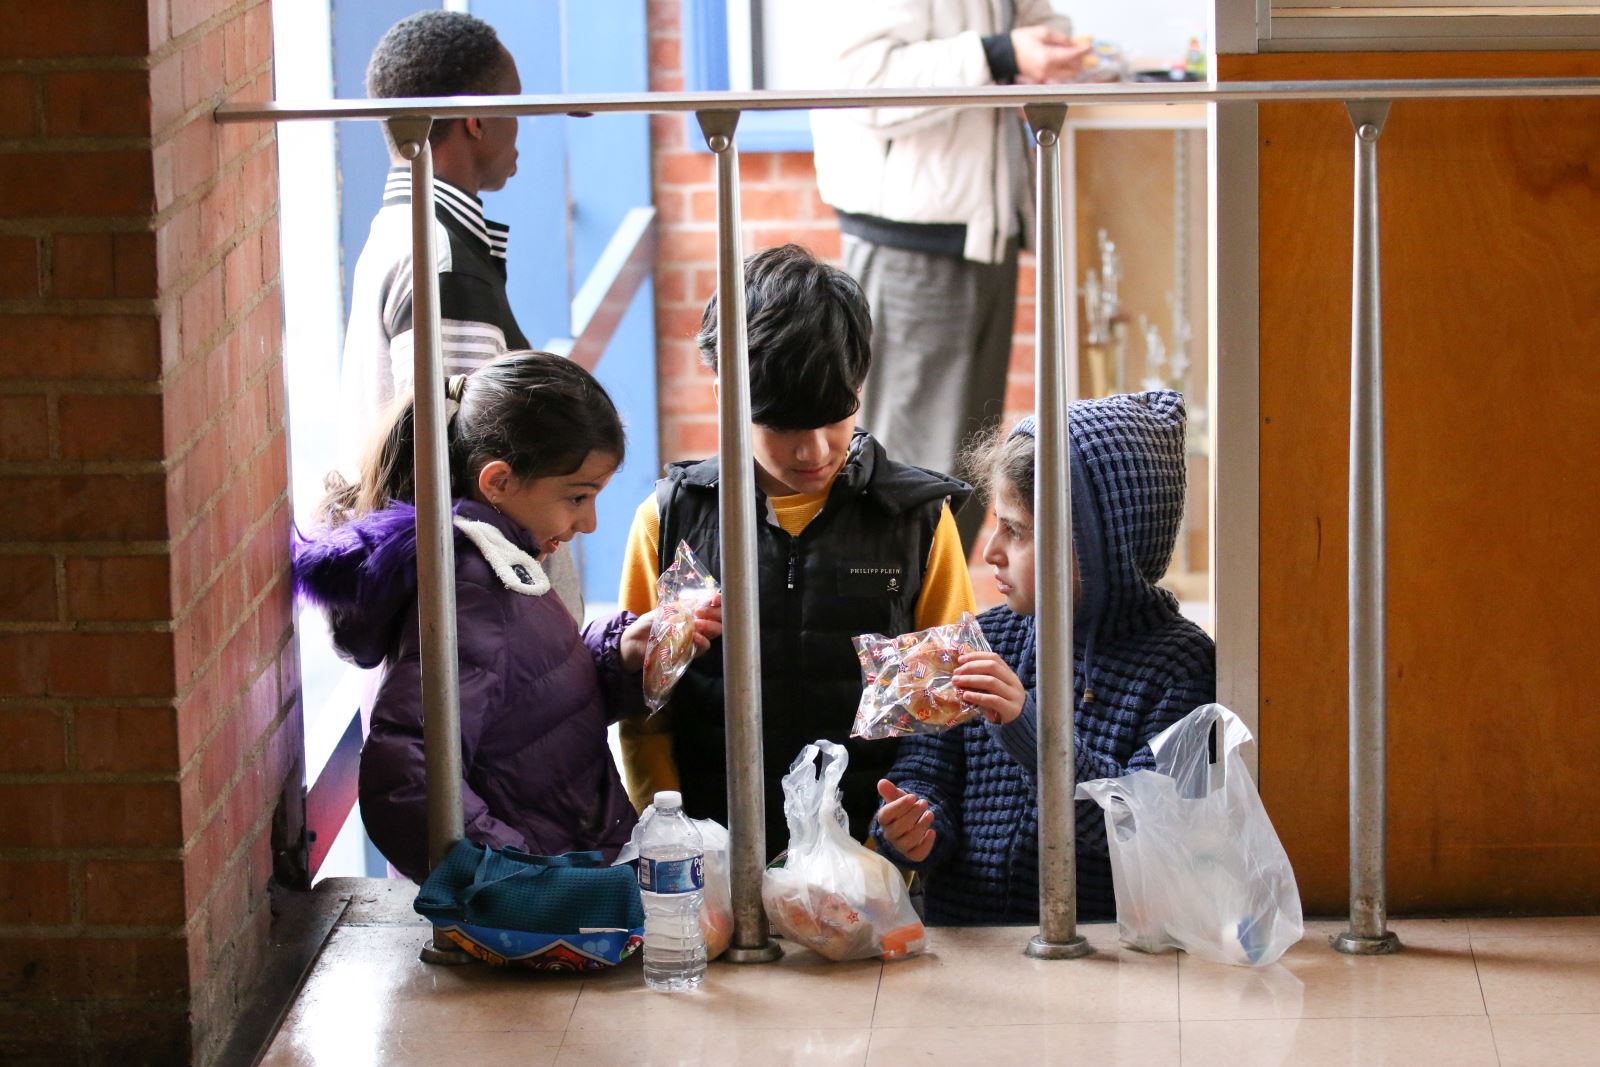 Refugee students enjoy their snacks in the hallway